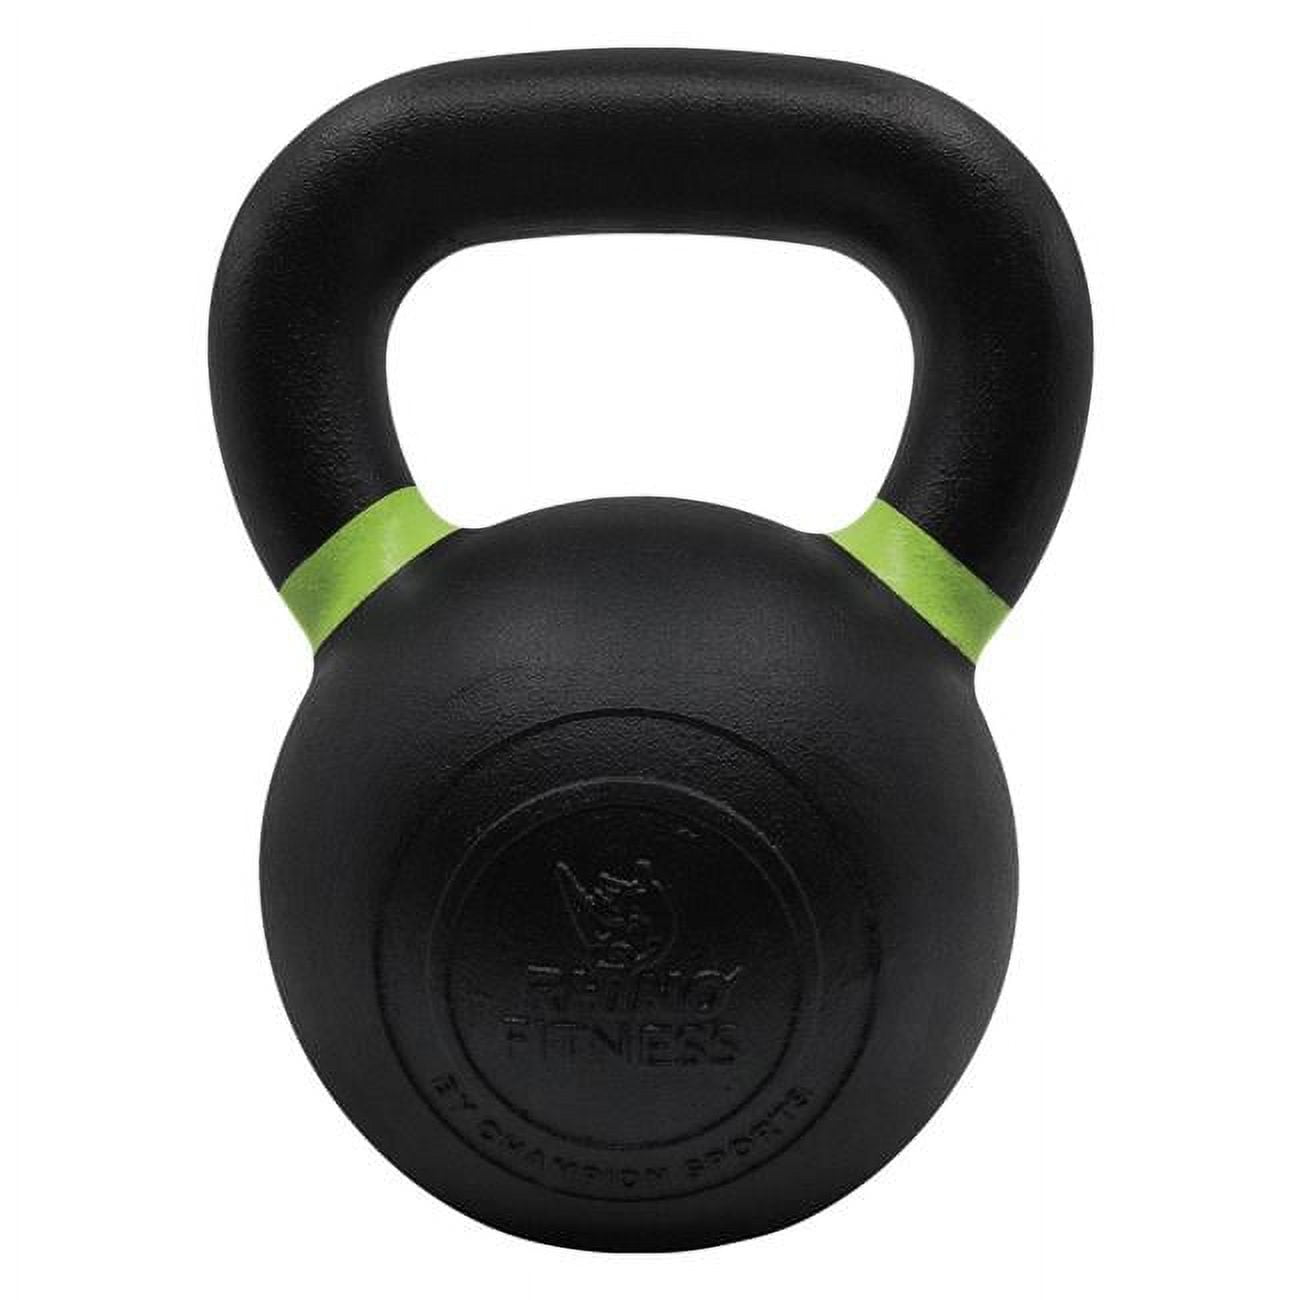 Picture of Champion Sports PCK50 8 x 6 x 10 in. 50 lbs Iron Kettlebell with Green Handles